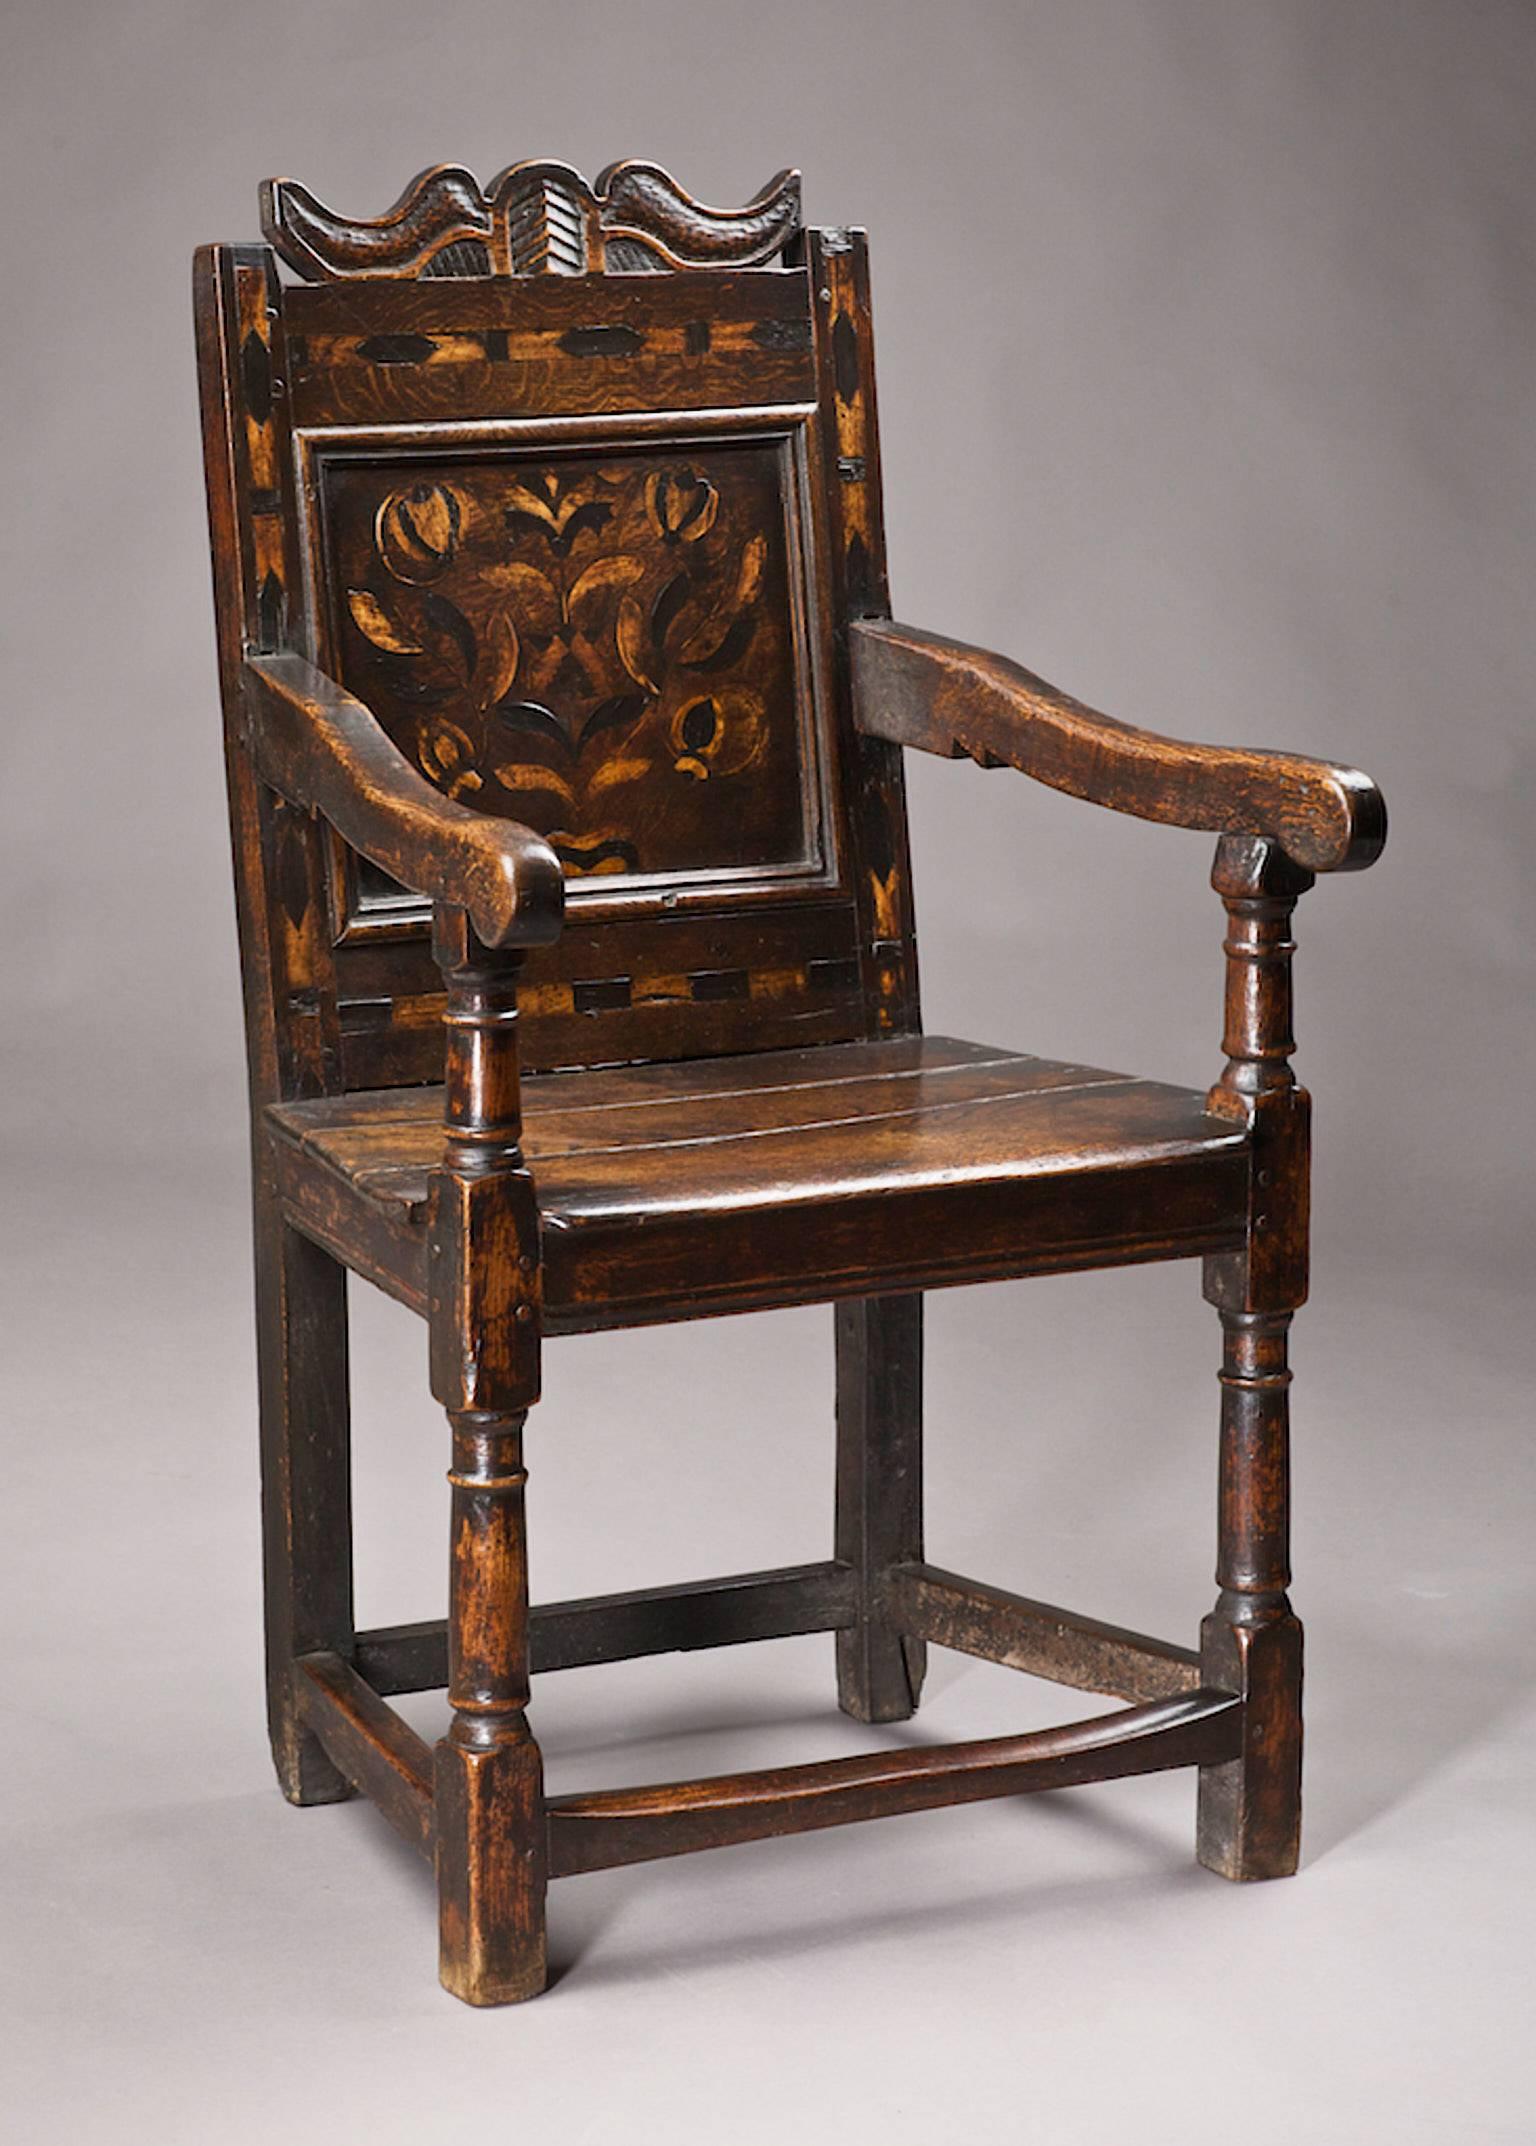 Mid-17th century Oak and Inlaid armchair, English, Gloucestershire, circa 1640-1660

The unusual scroll shaped and diaper carved cresting centred upon a palmette above bold chevron inlaid rails, with floral contrasting inlaid back panel, chevron